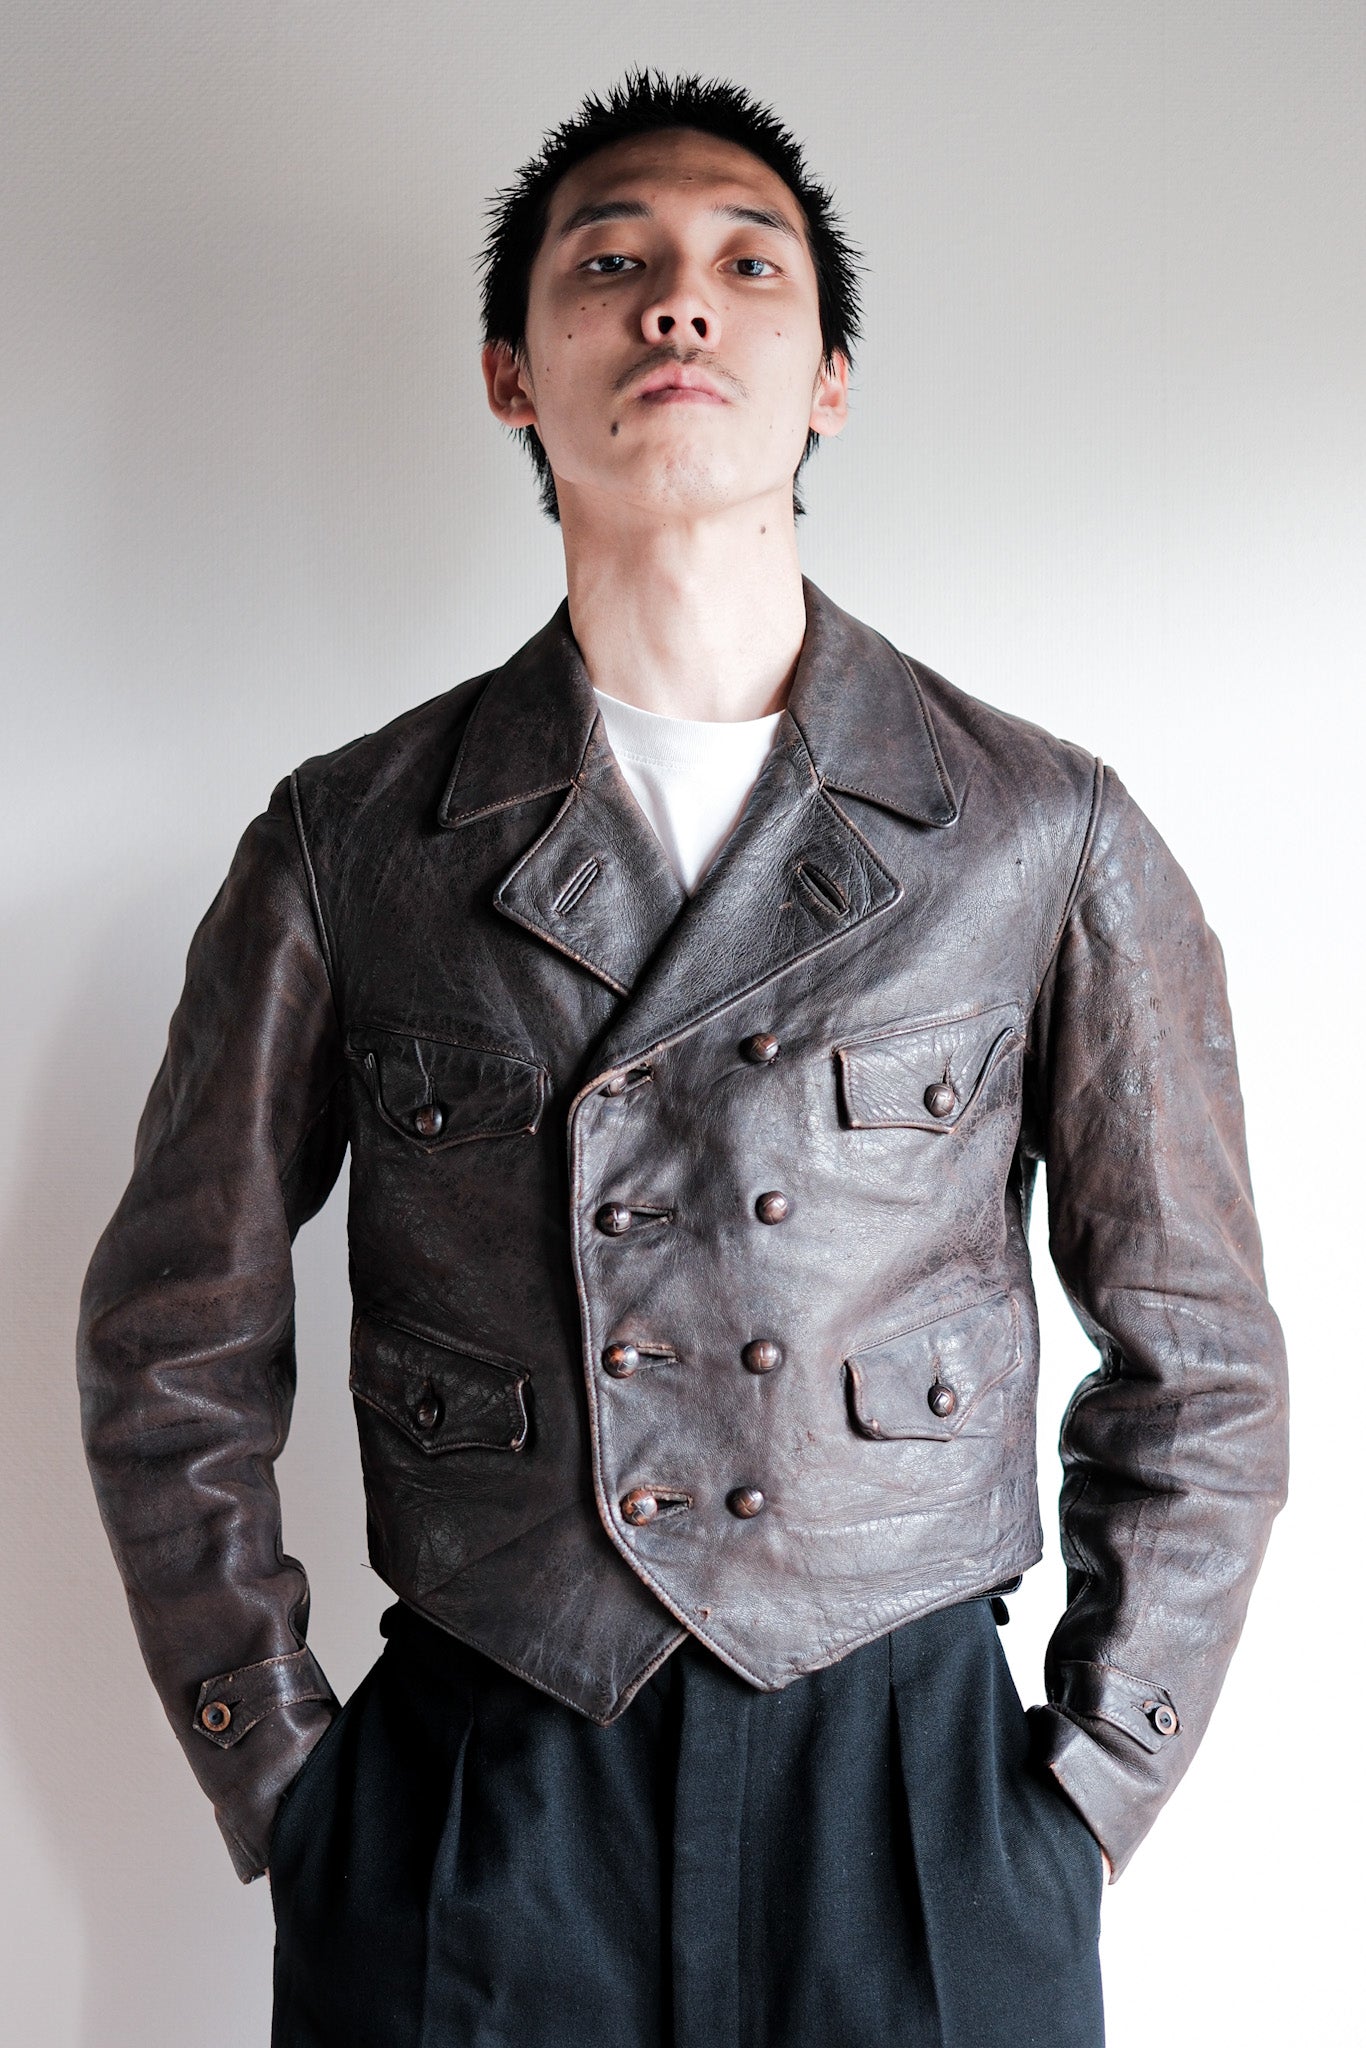 40's】German Vintage Double Breasted Motorcycle Leather Jacket